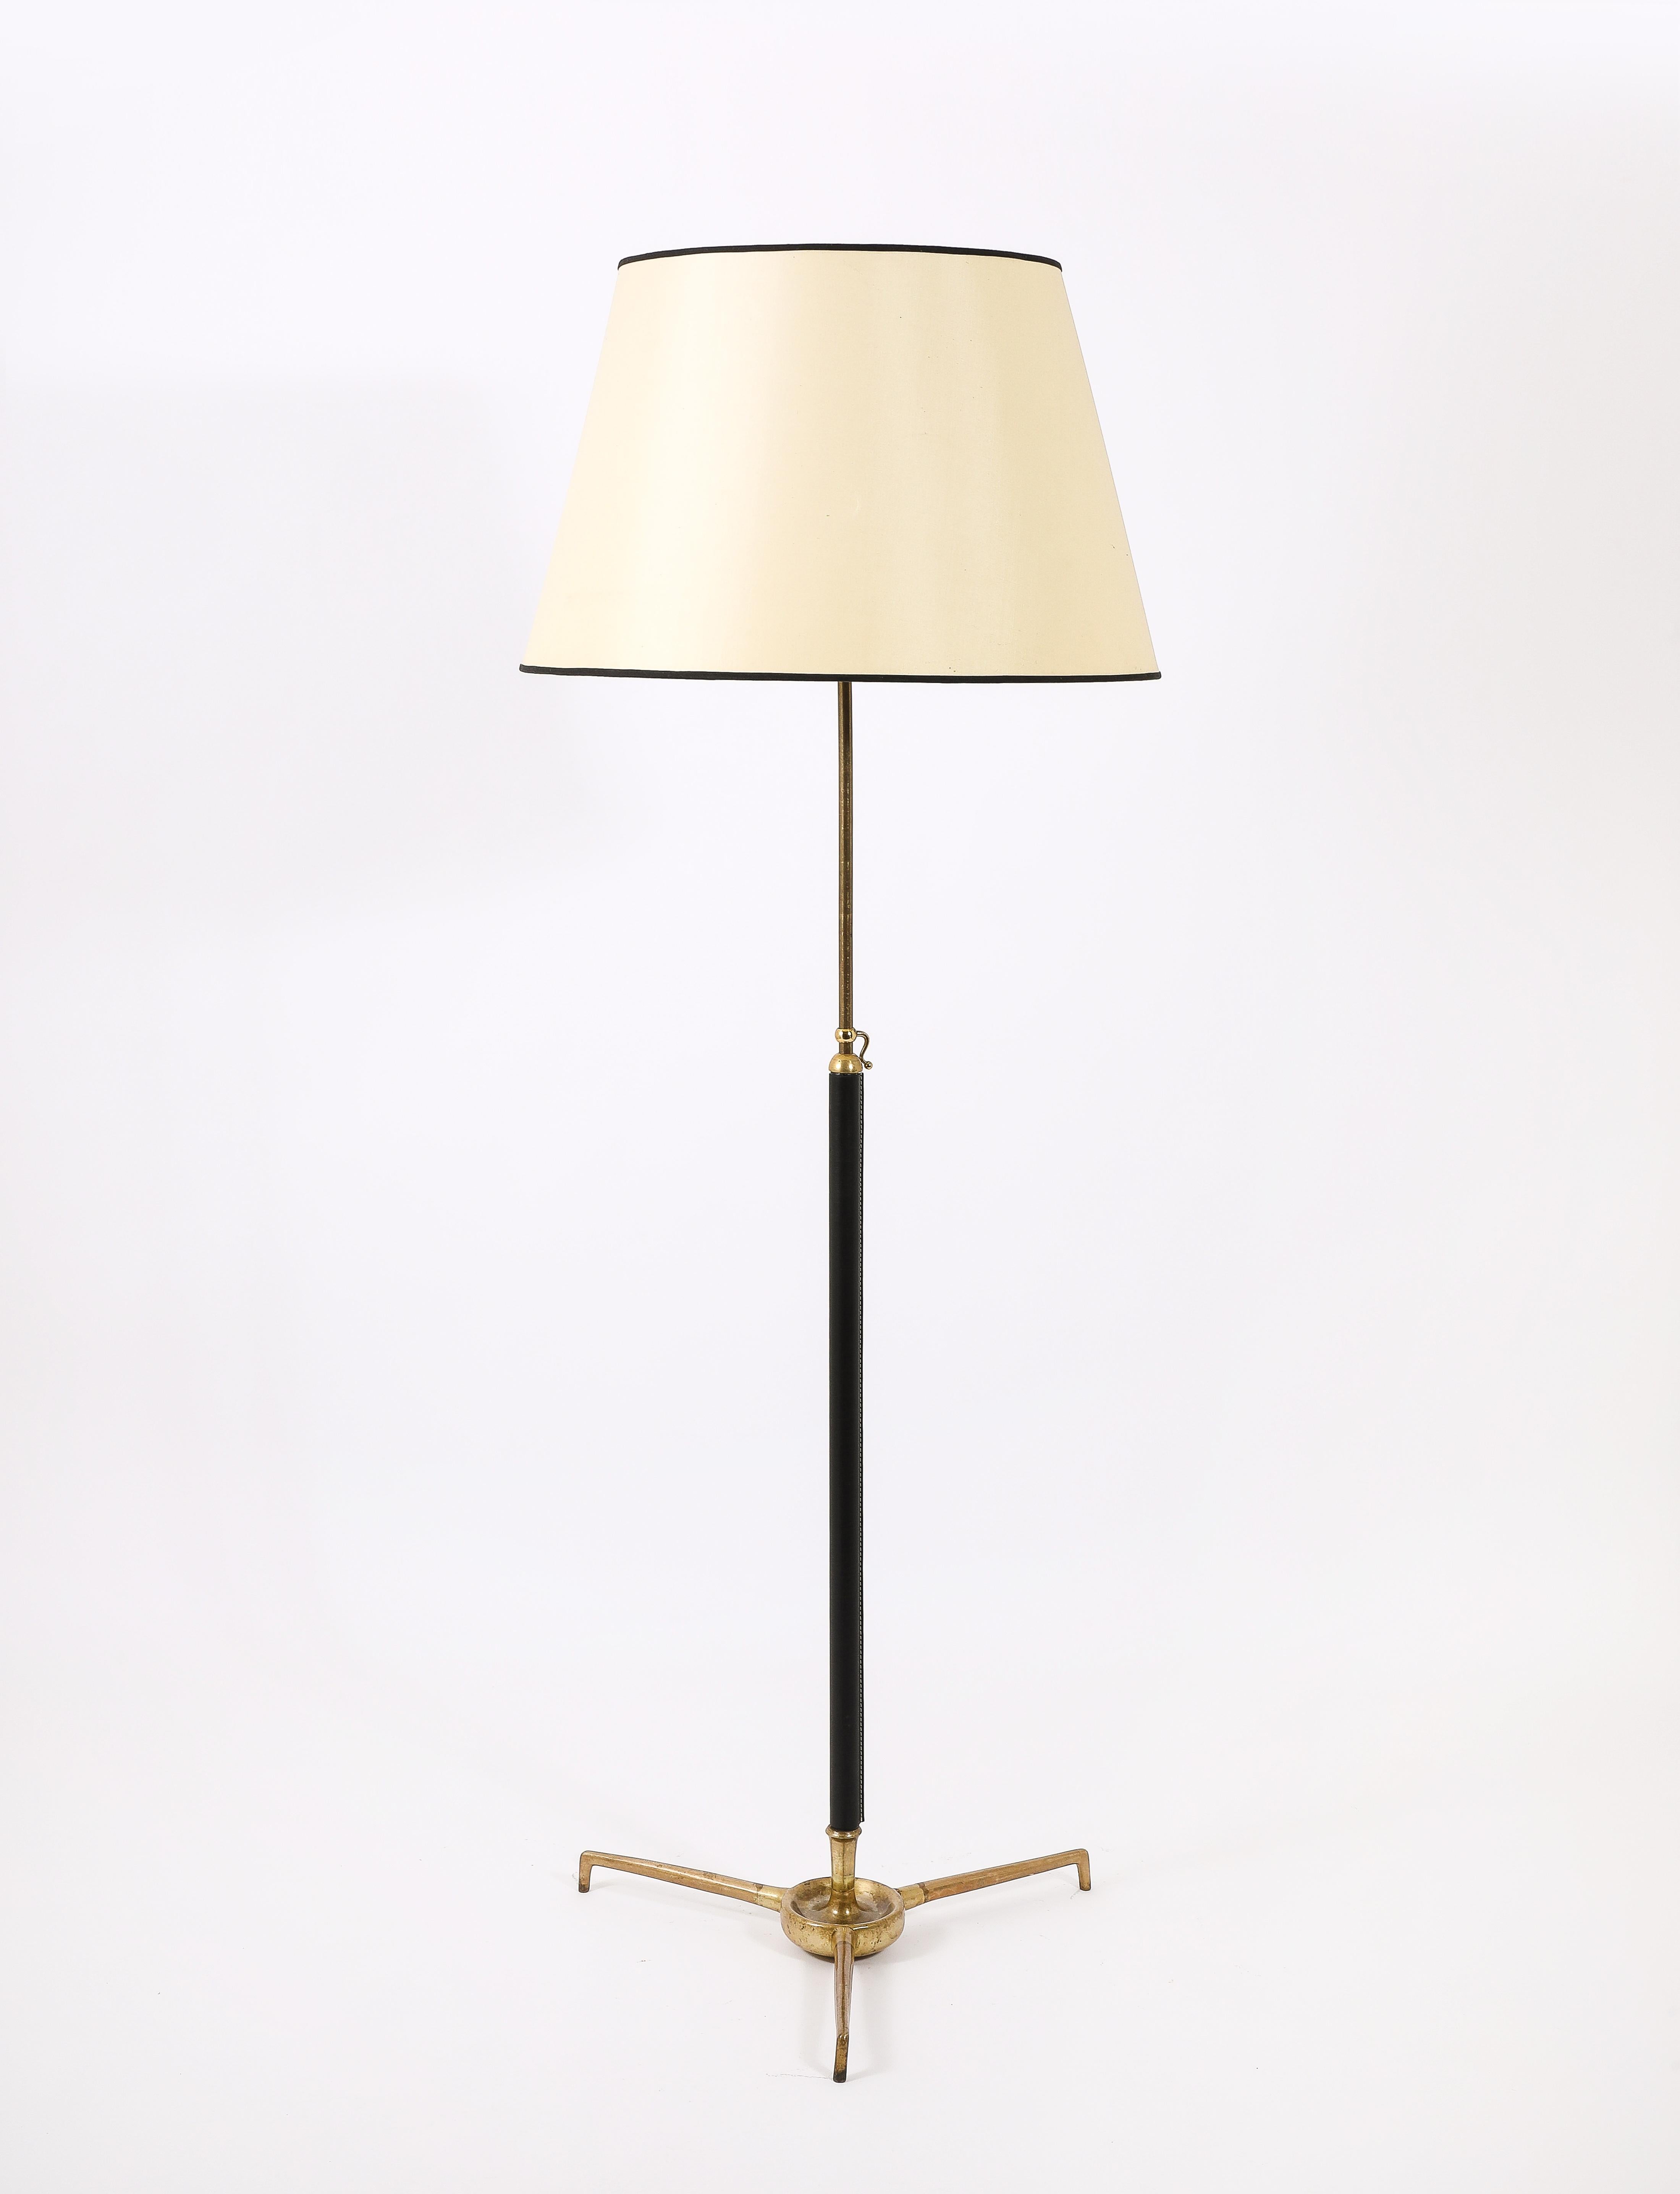 Large Bronze and leather floor lamp, a massive tripod bronze base supports the center stem, leather wrapped pole and an adjustable system that allows to raise or lower the shade from 60